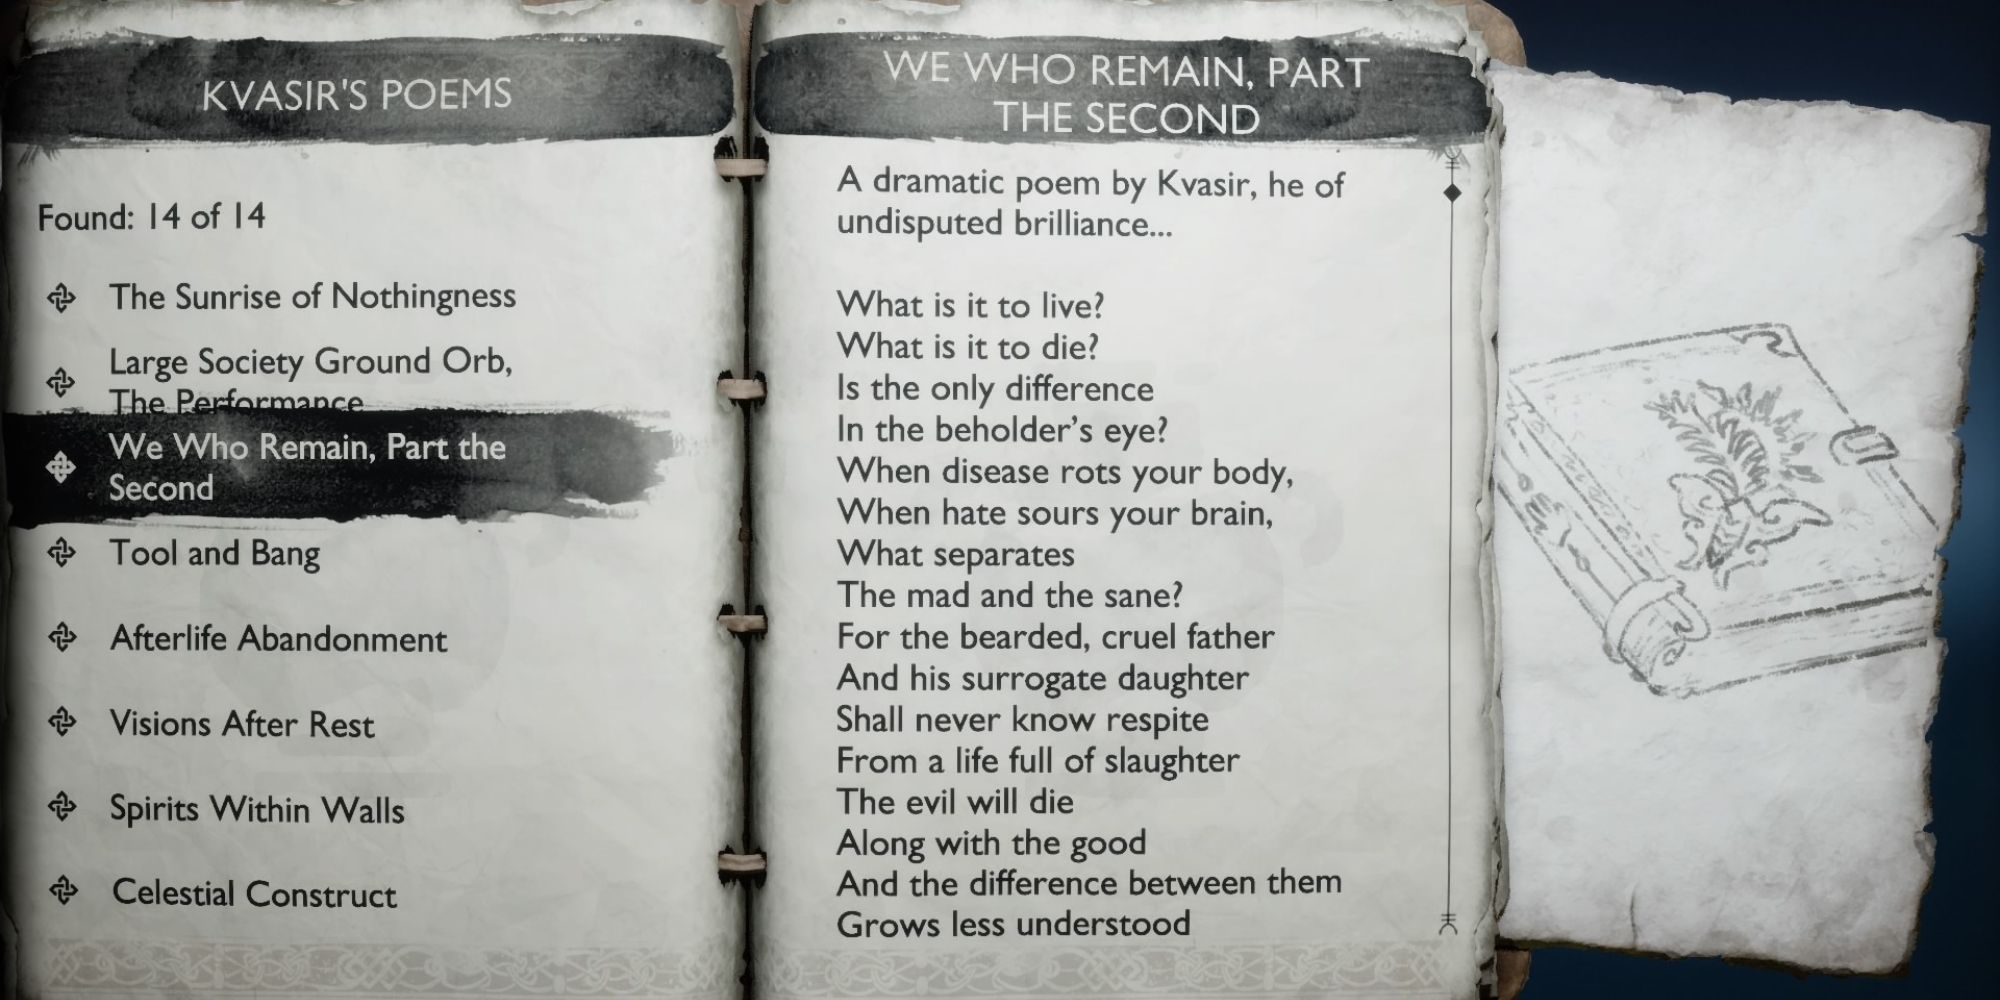 Krato's journal open to the page about We Who Remain, Part the Second